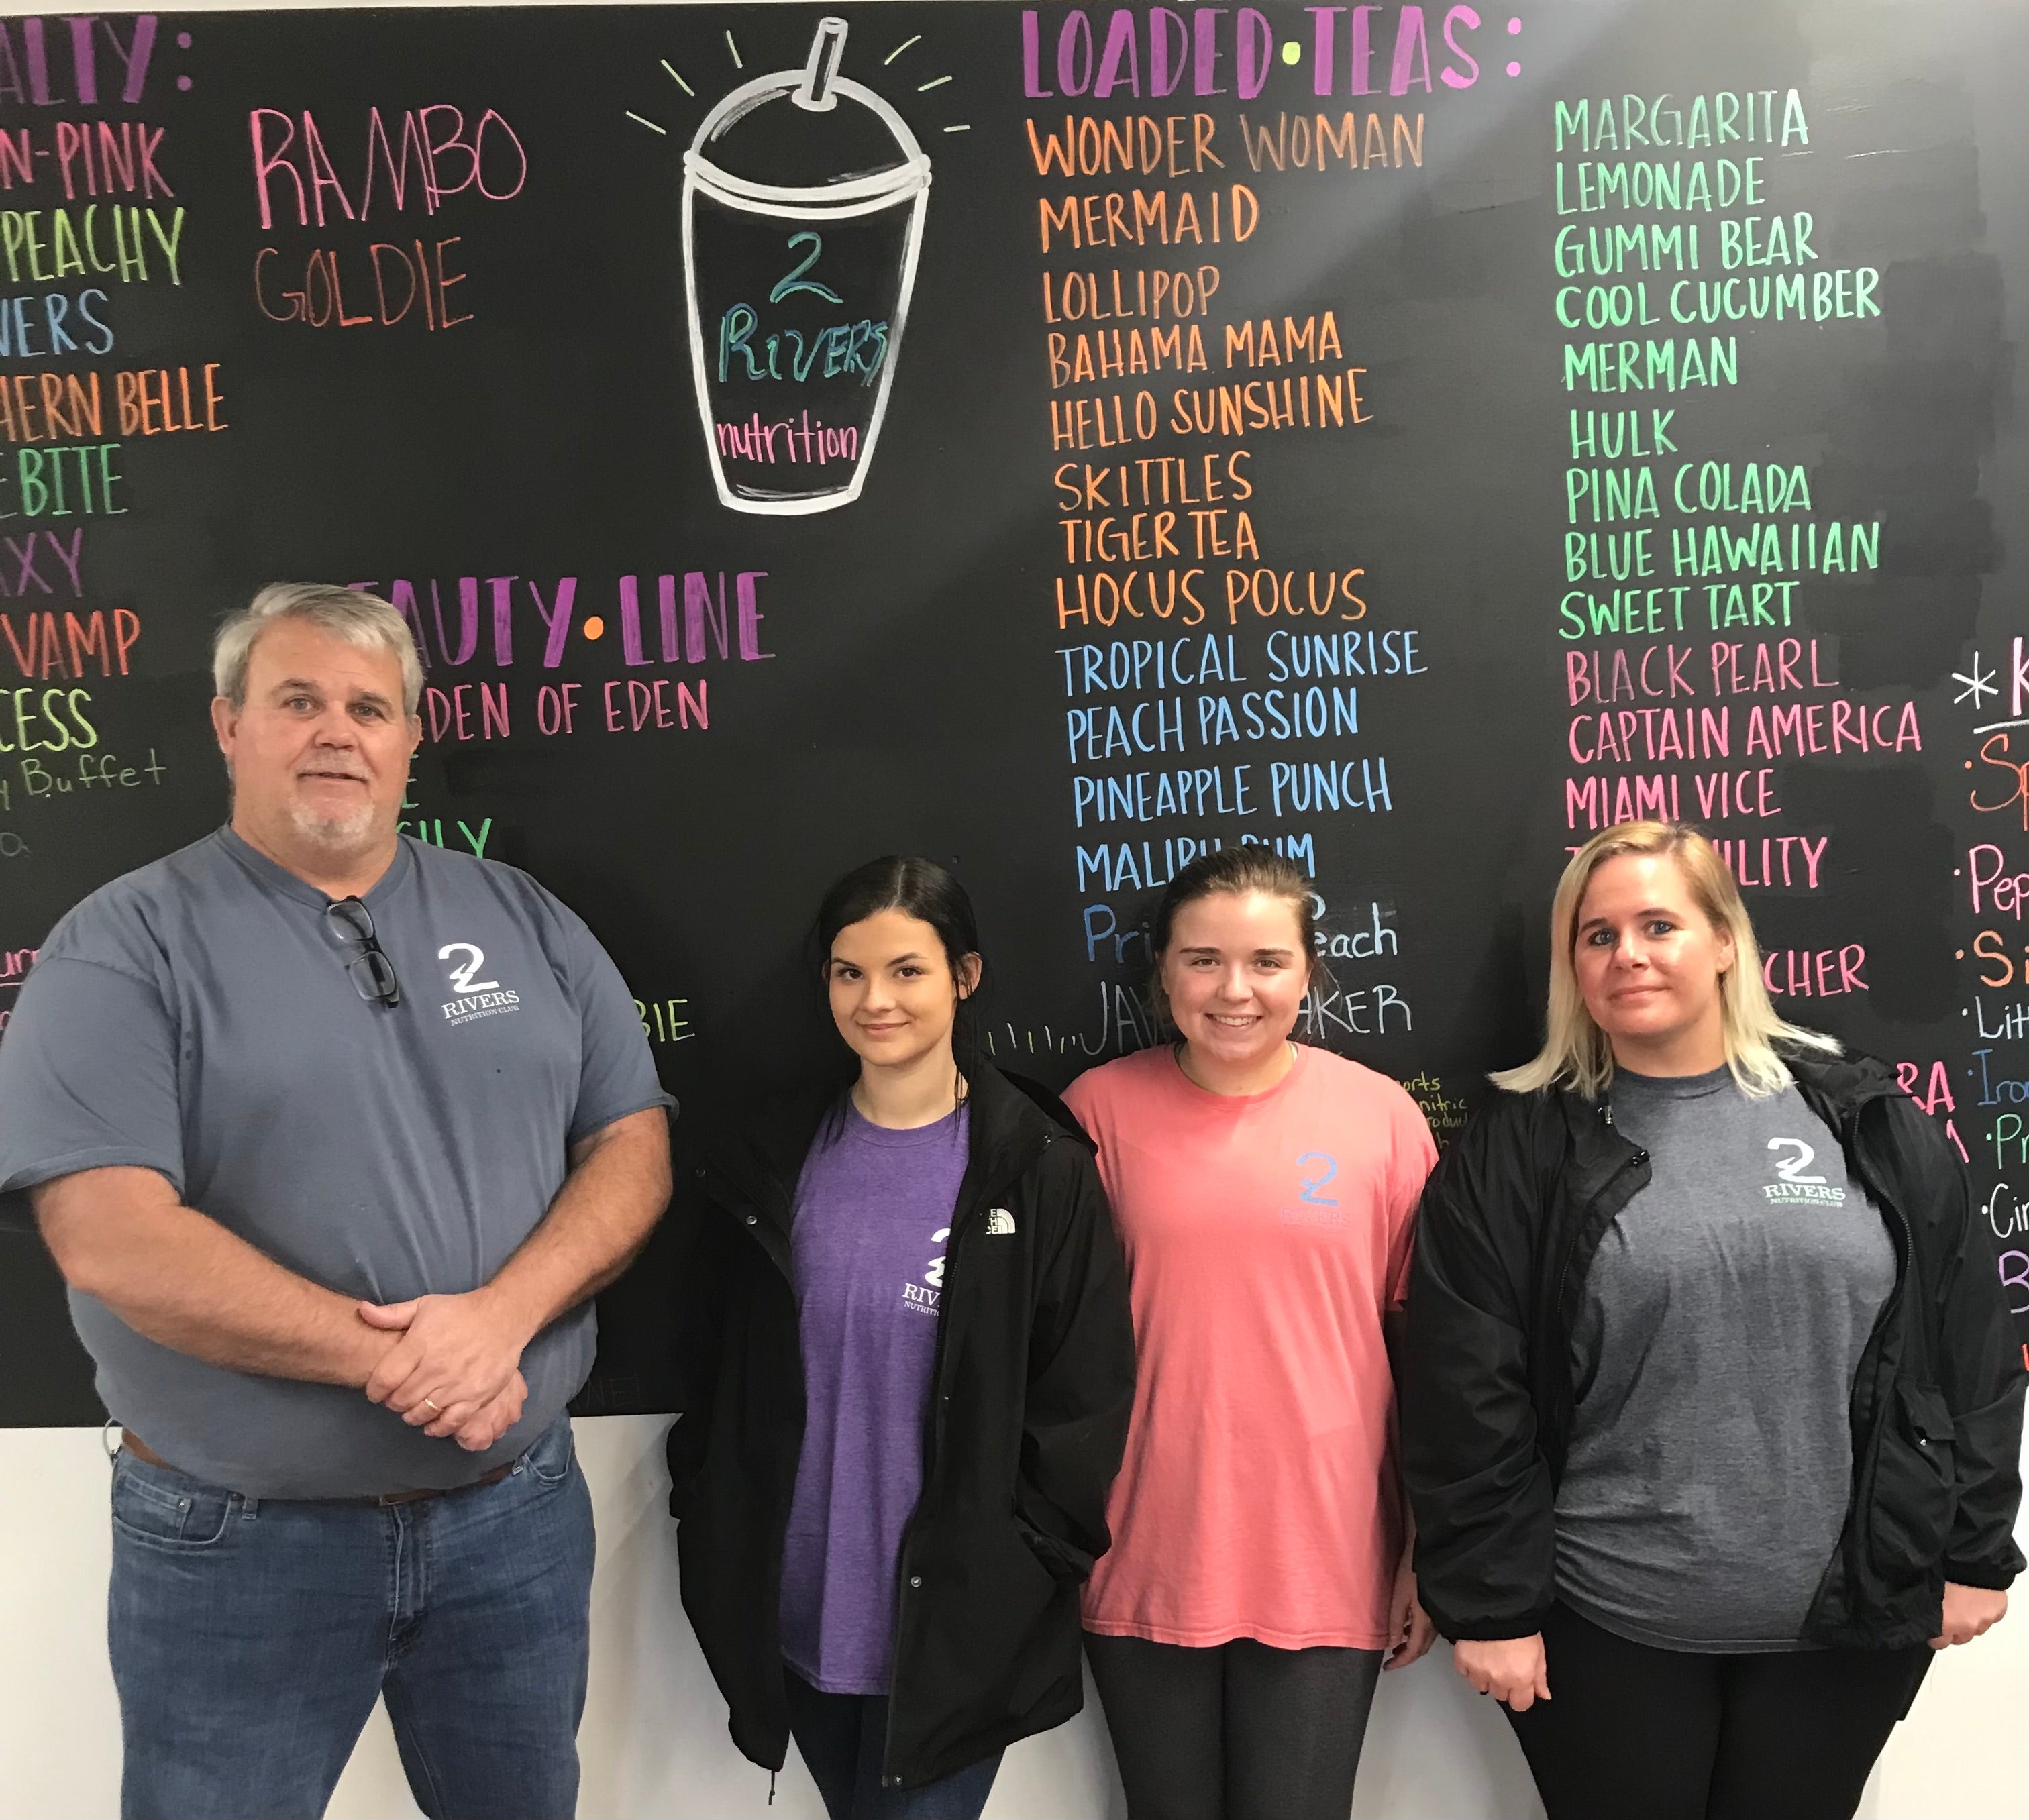 2 Rivers Nutrition offers wide range of products that are good for the body – The Demopolis Times